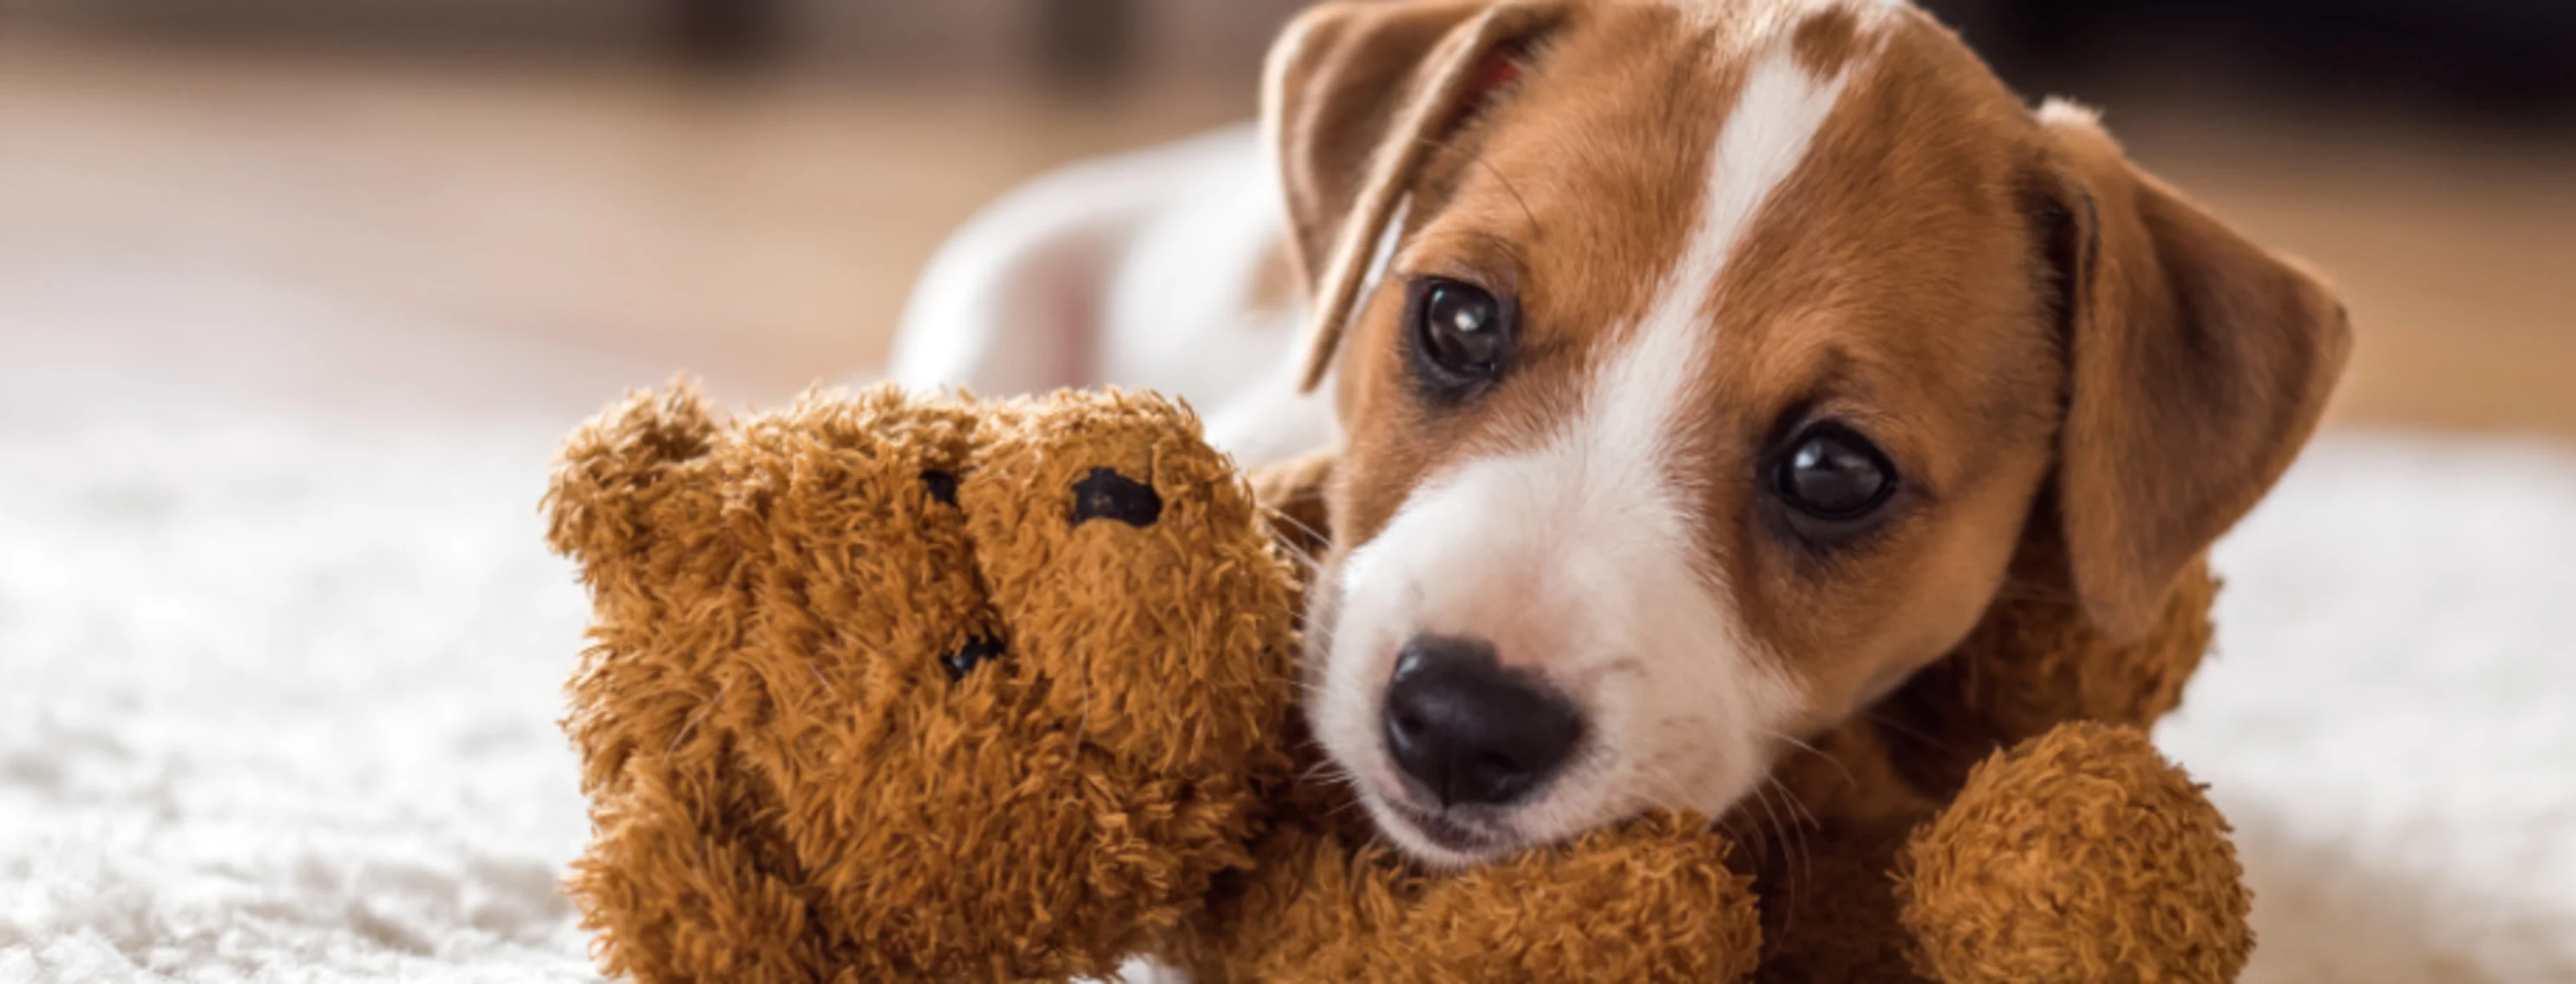 Puppy Playing with a Teddy Bear